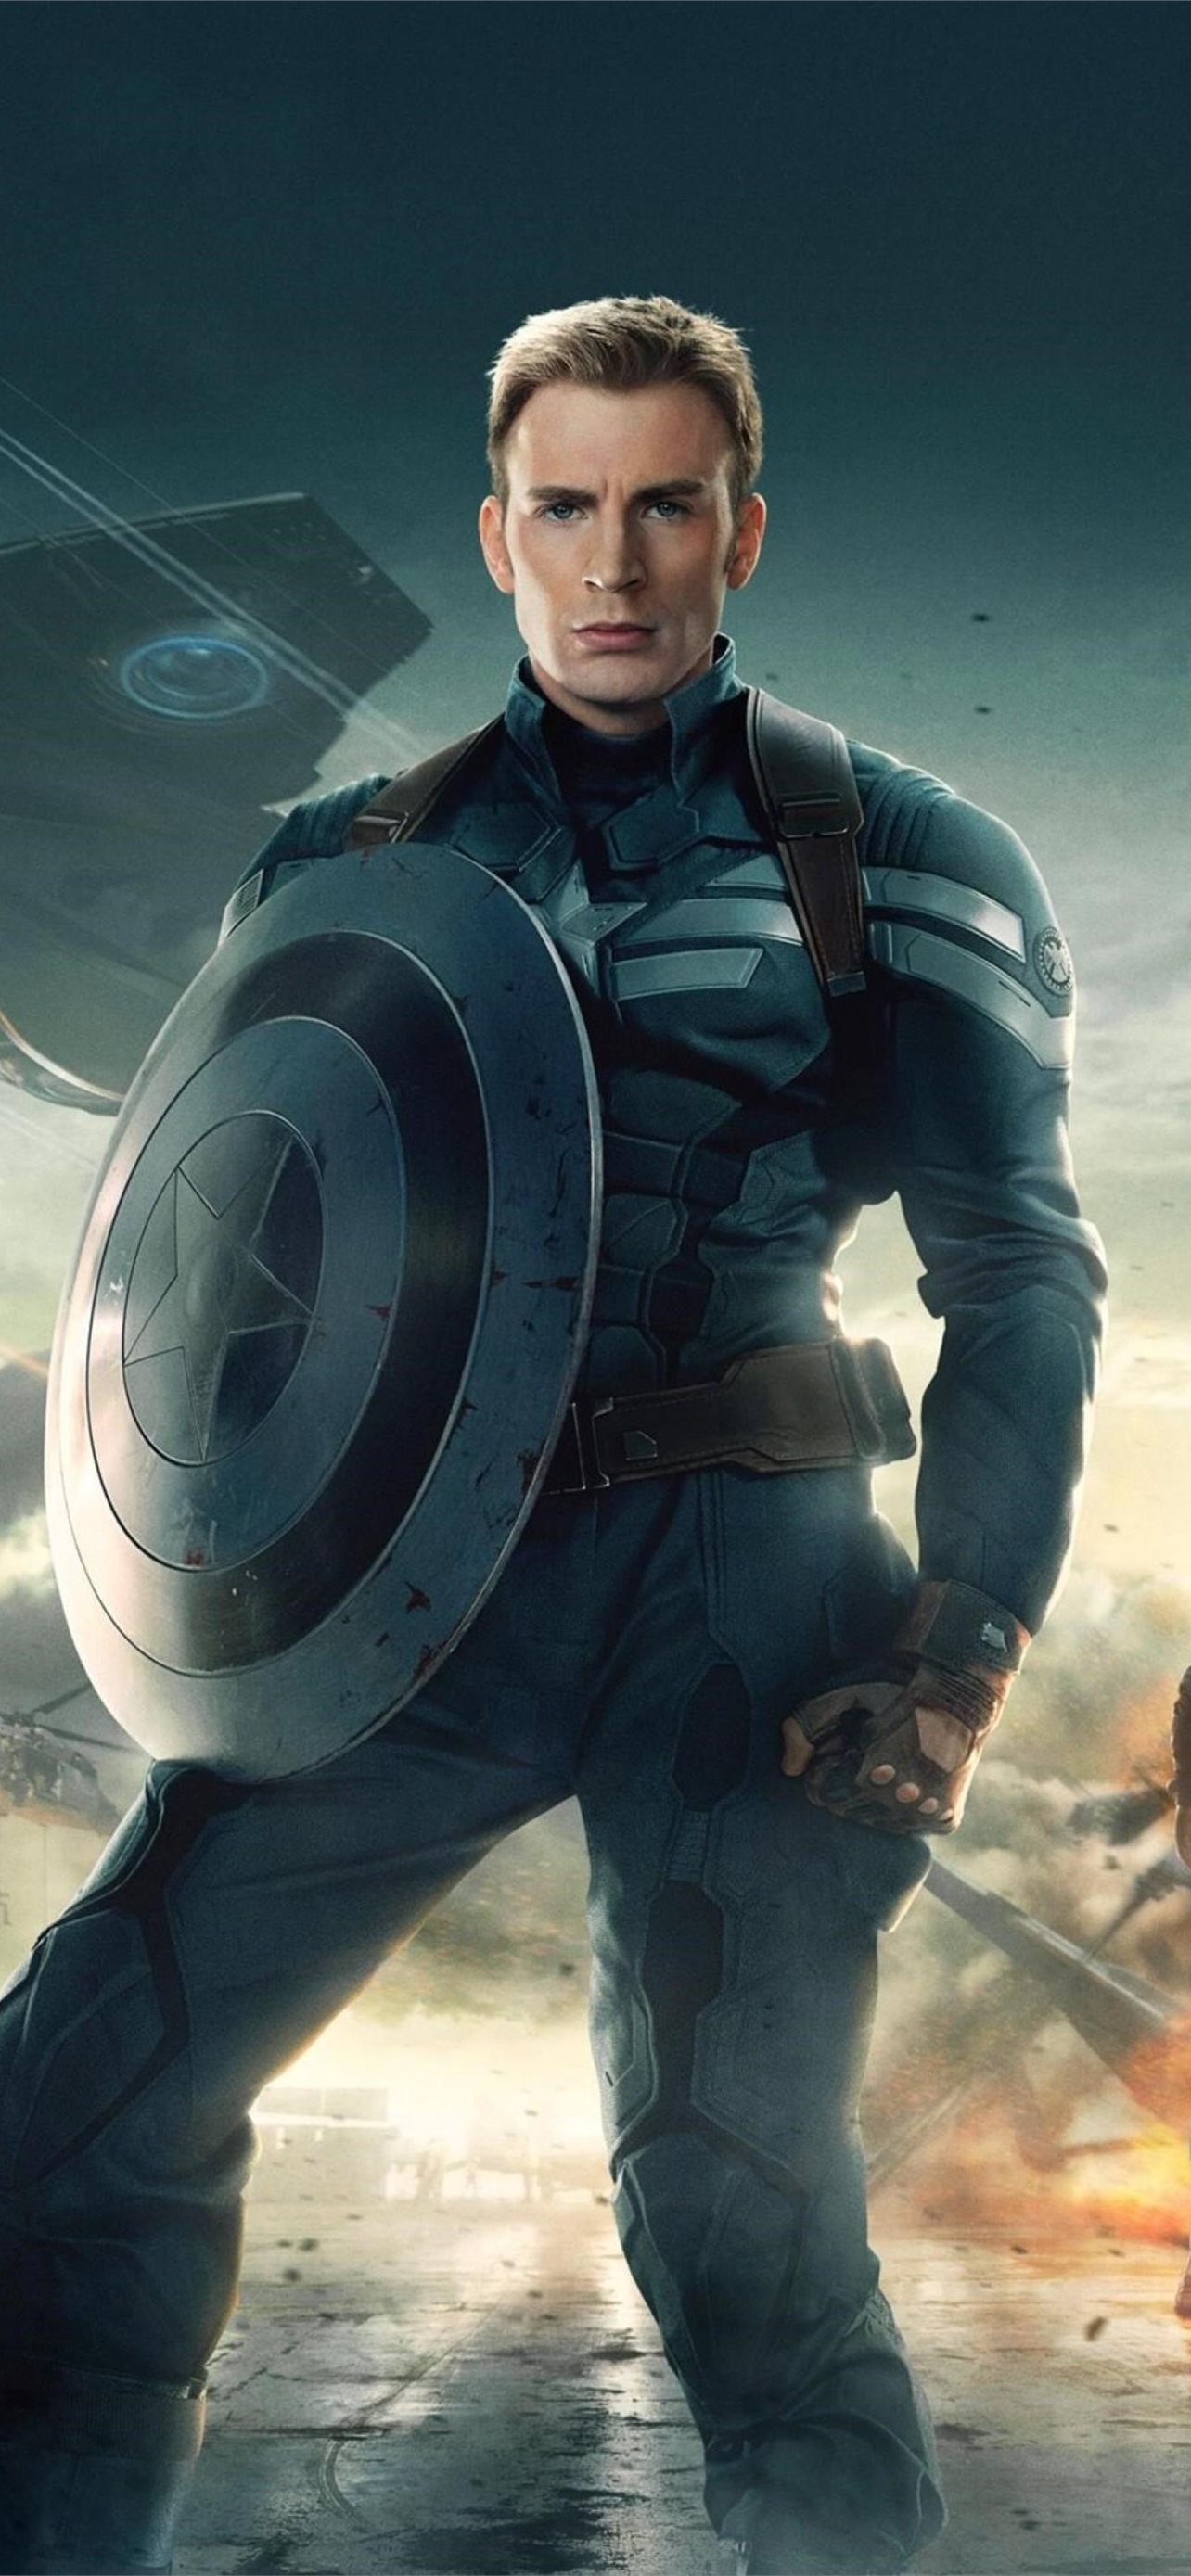 Winter Soldier, Captain America, iPhone wallpapers, Free download, 1290x2780 HD Handy